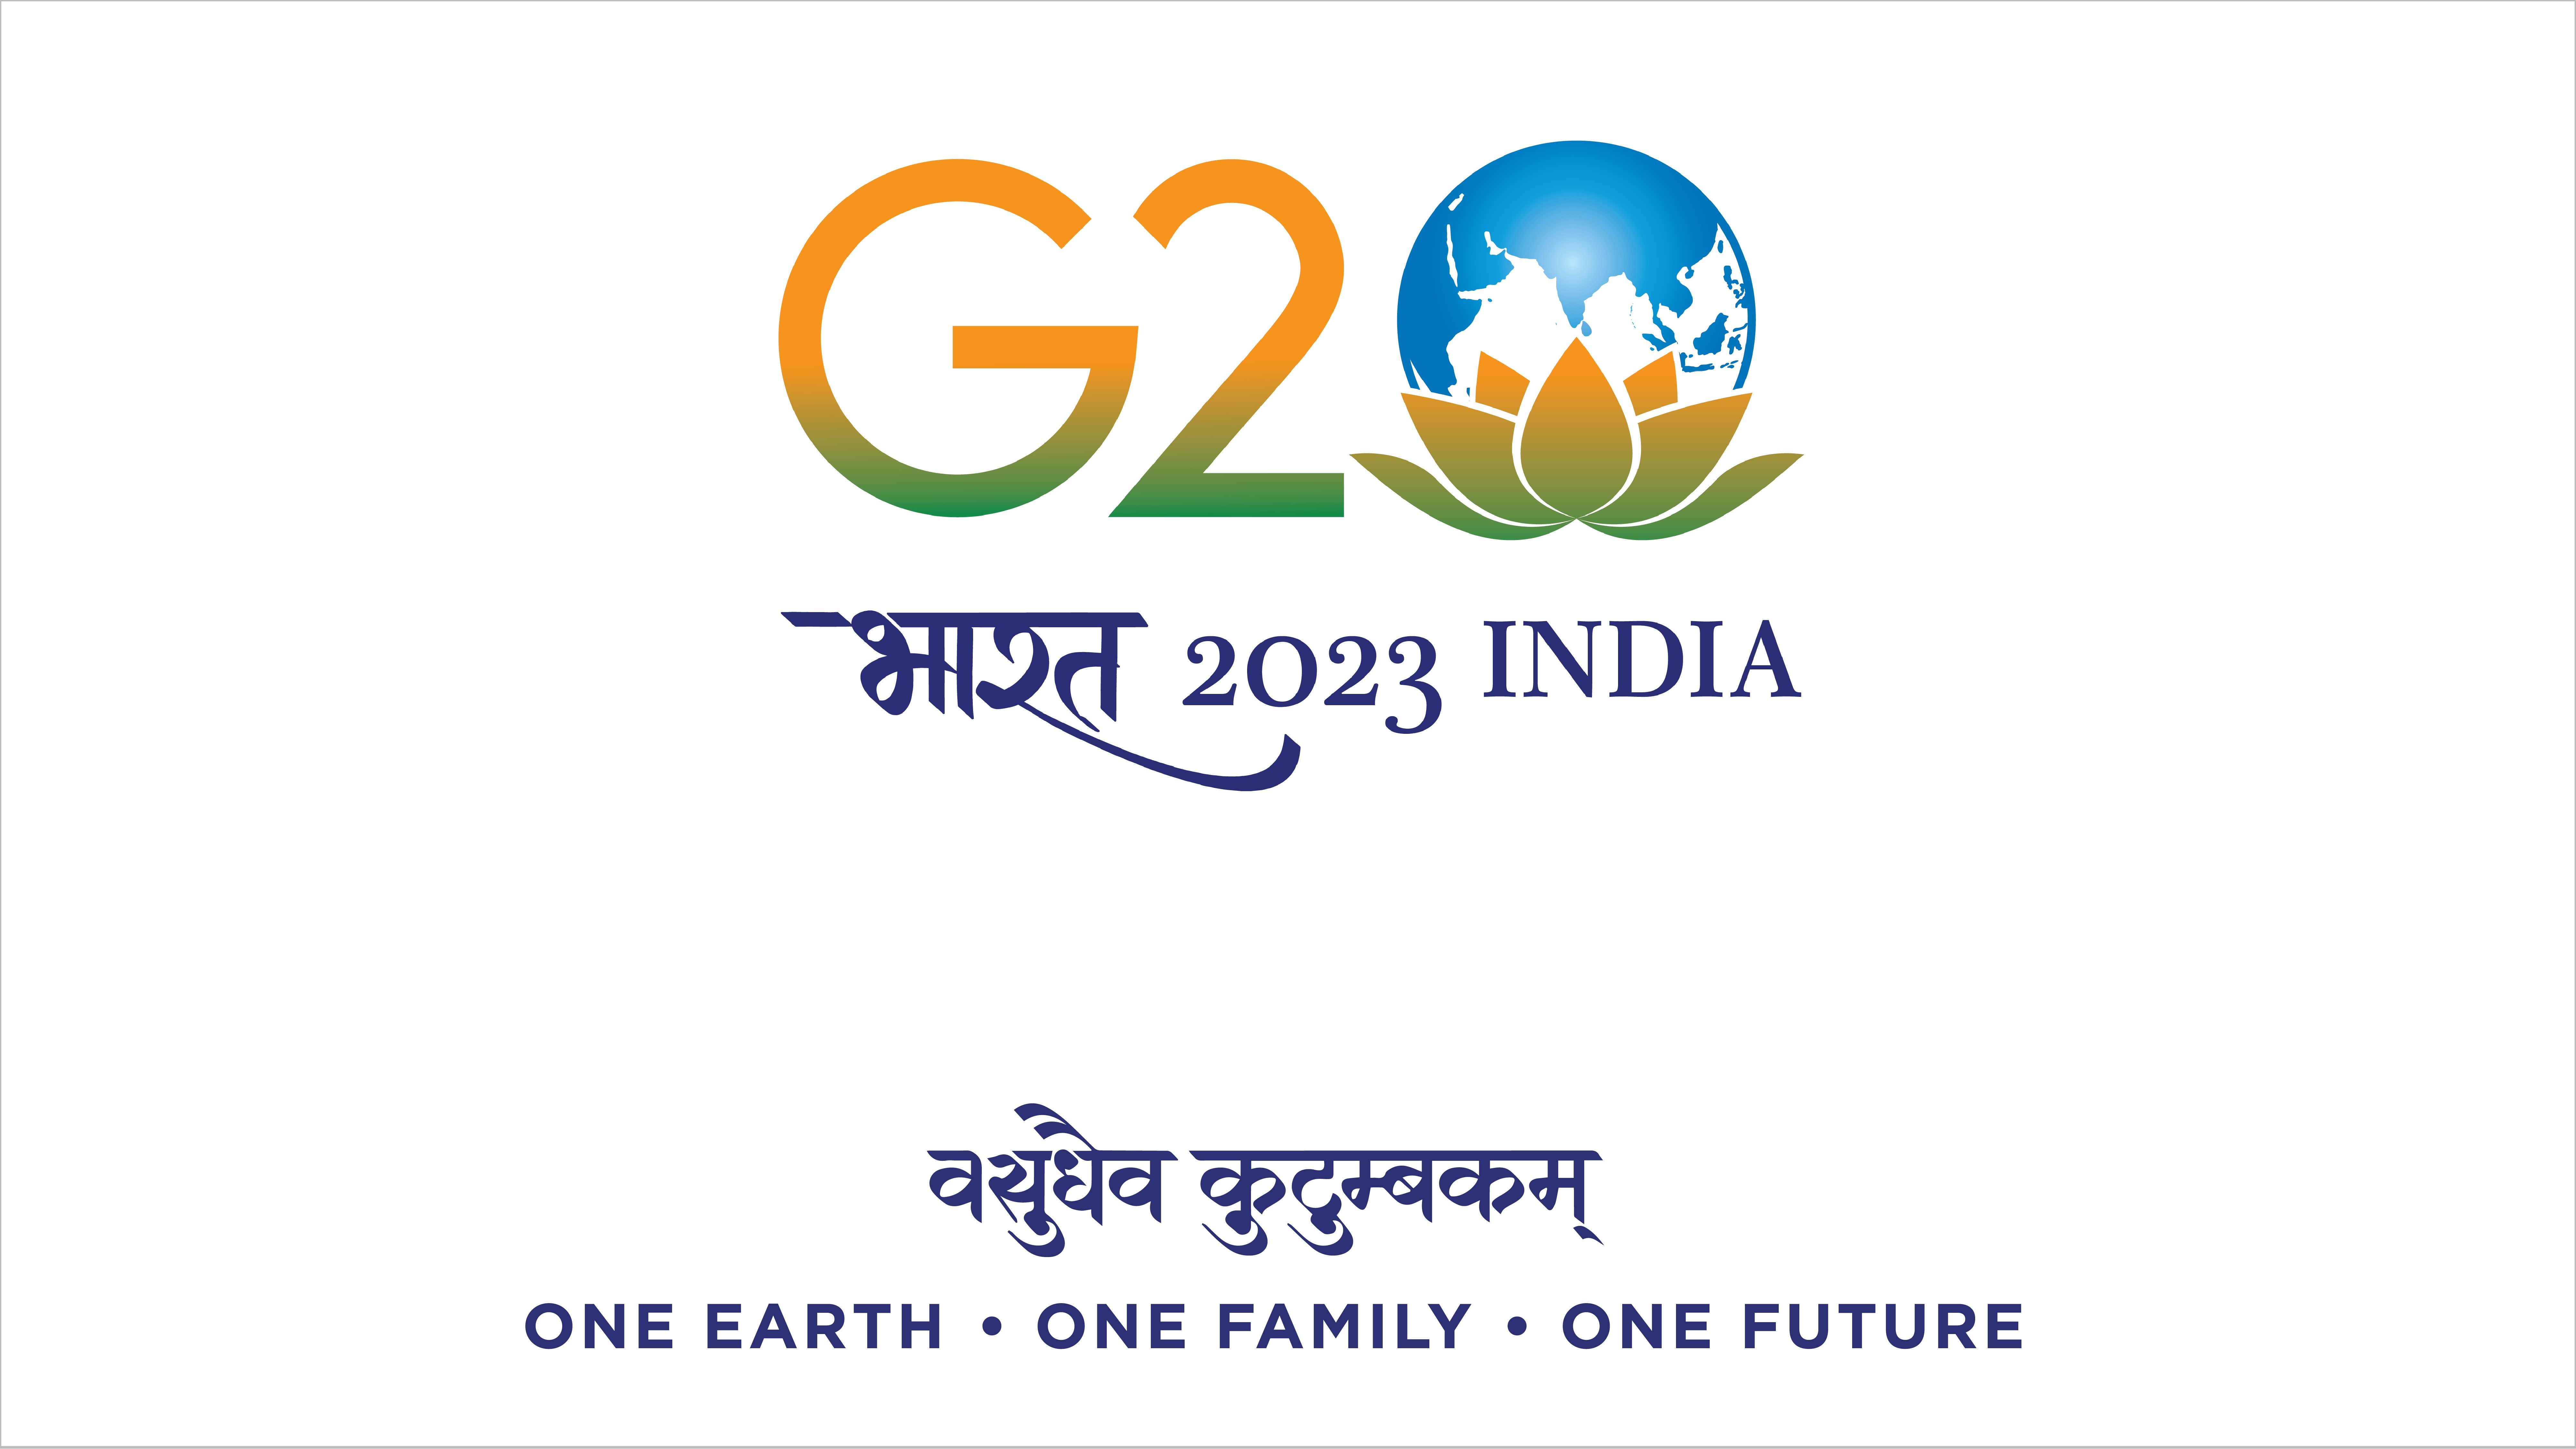 Plans for India-Middle East-Europe economic corridor unveiled at G20 summit
